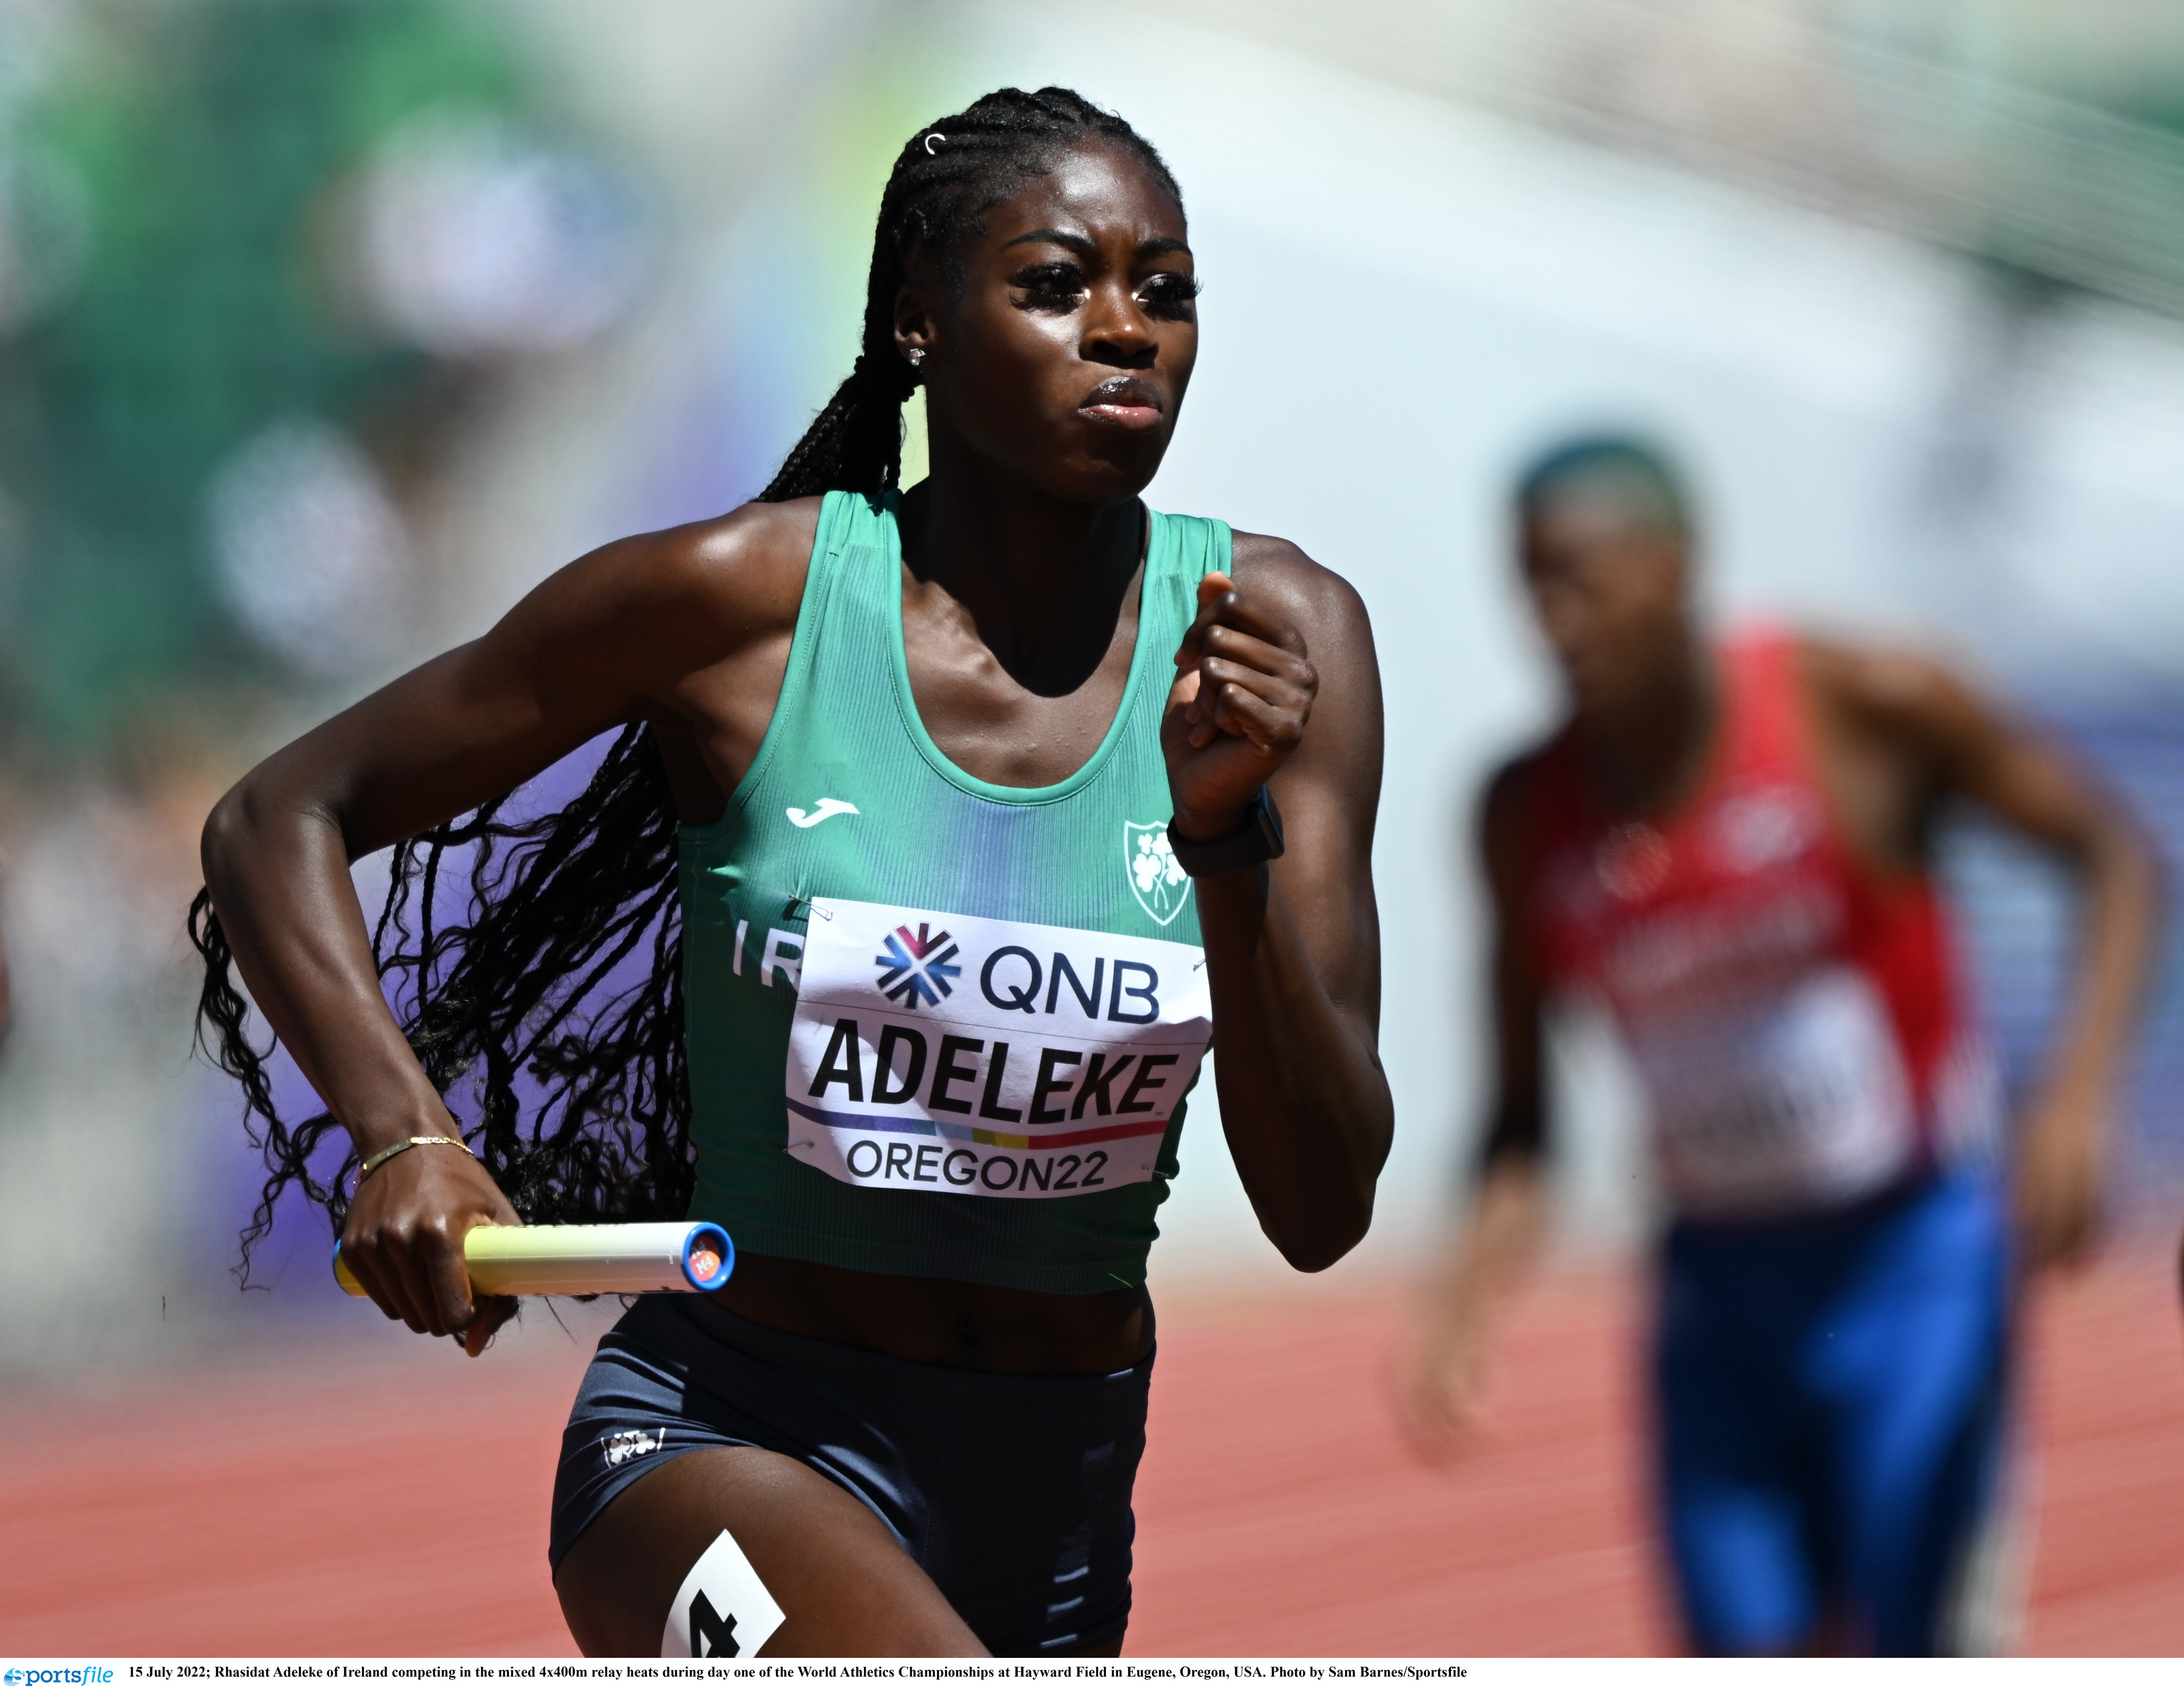 ADELEKE & O’DONNELL THROUGH TO WORLD CHAMPIONSHIP SEMI FINALS